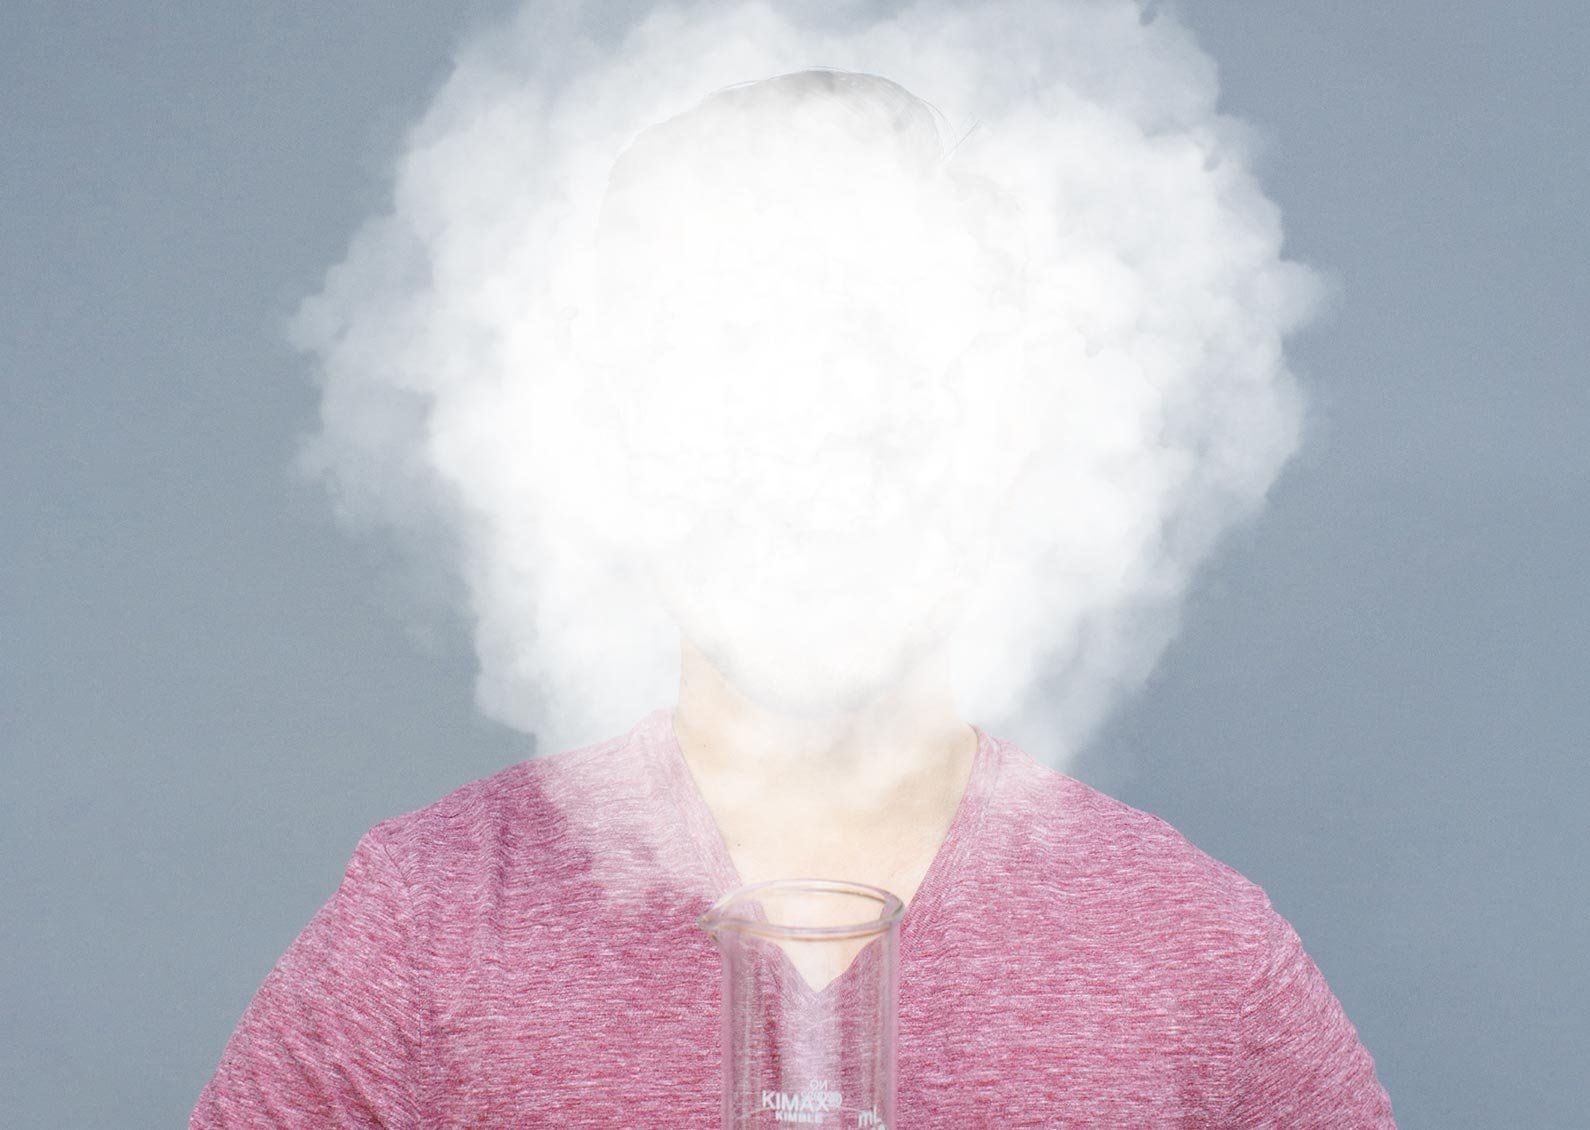 Photo of a person holding a large glass beaker, whose face is completely obscured with a smoke cloud.